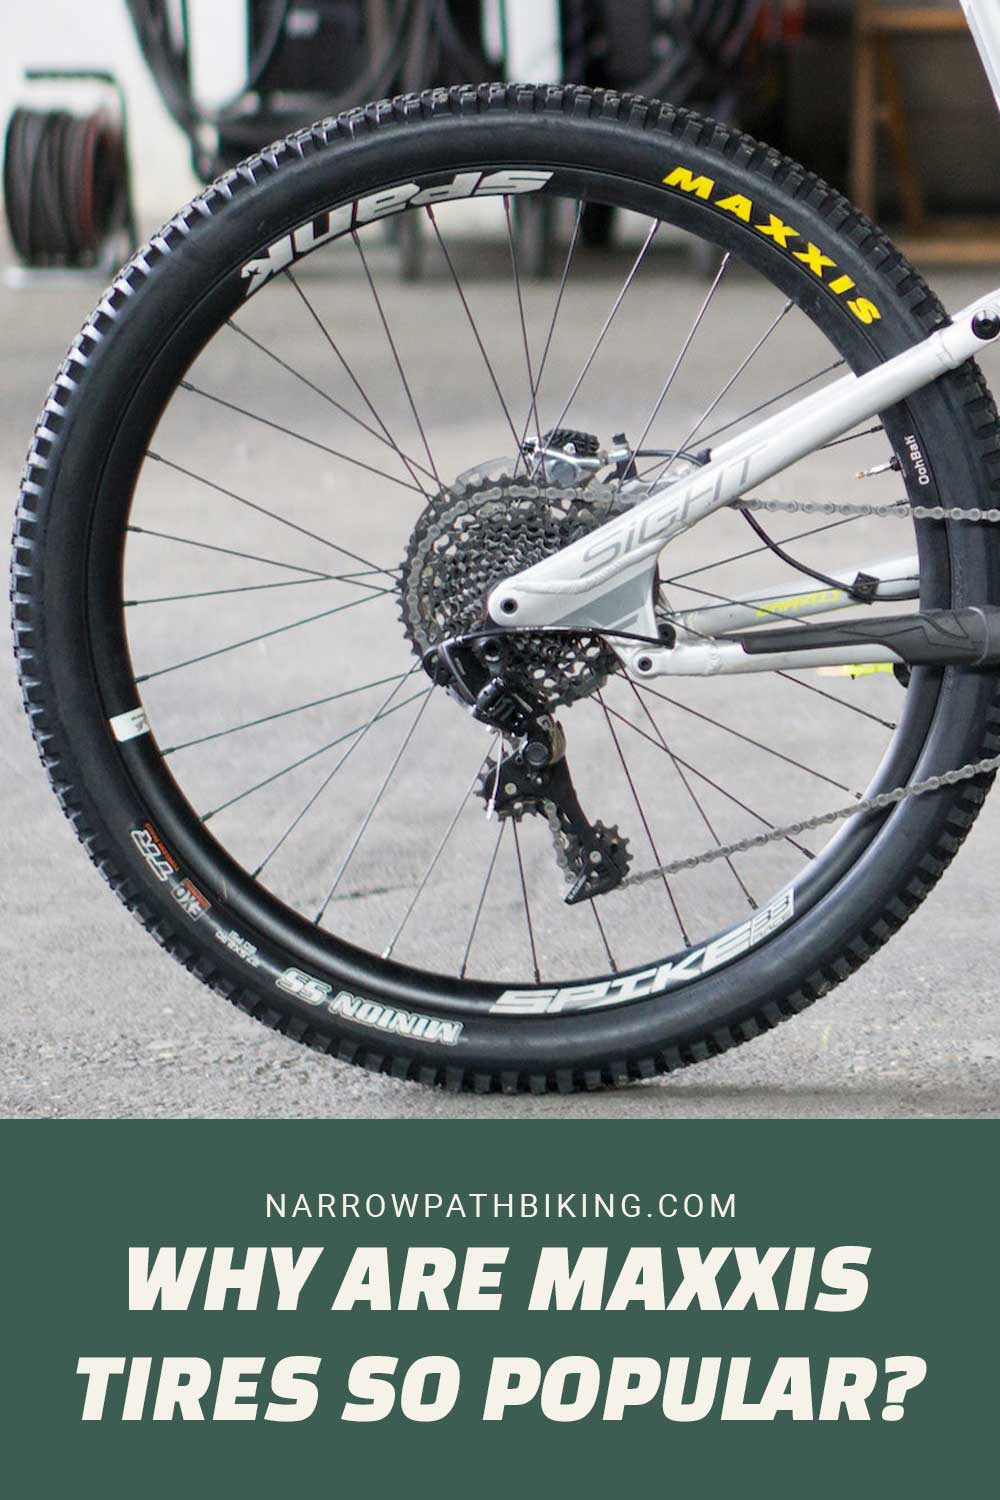 Why Are Maxxis Tires So Popular?